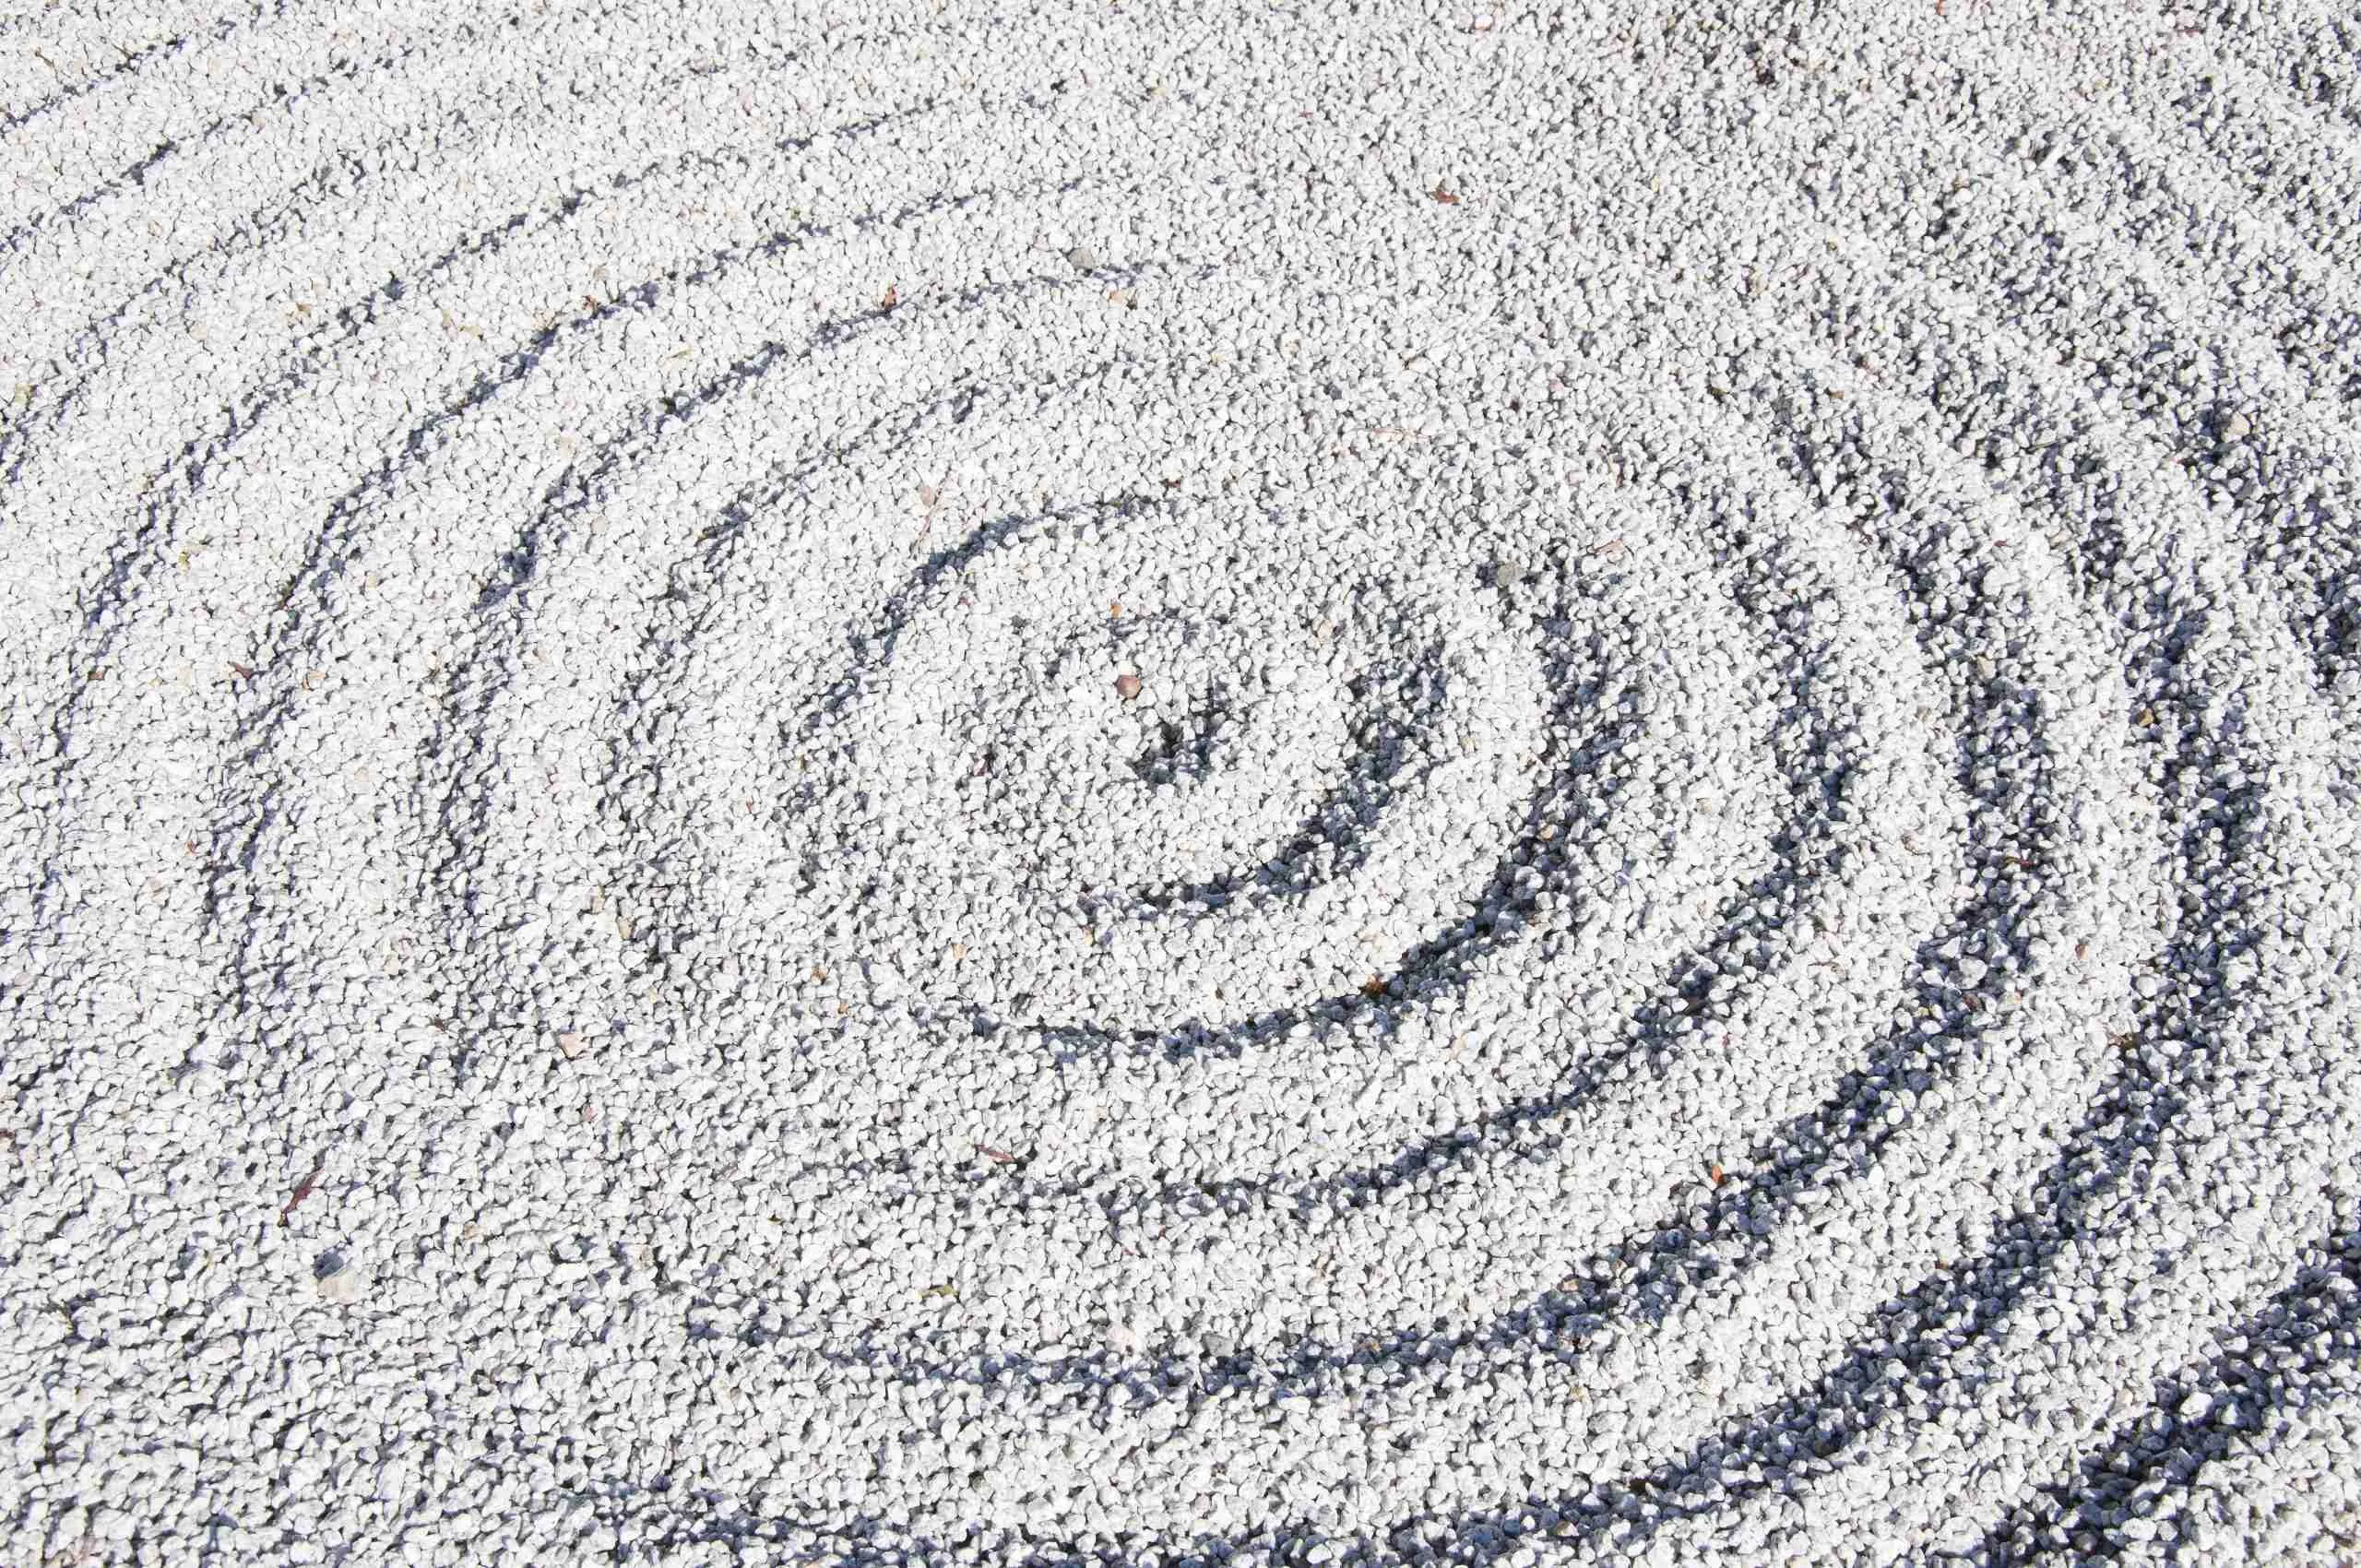 What Makes A Zen Garden Stand Out From Other Garden Types?